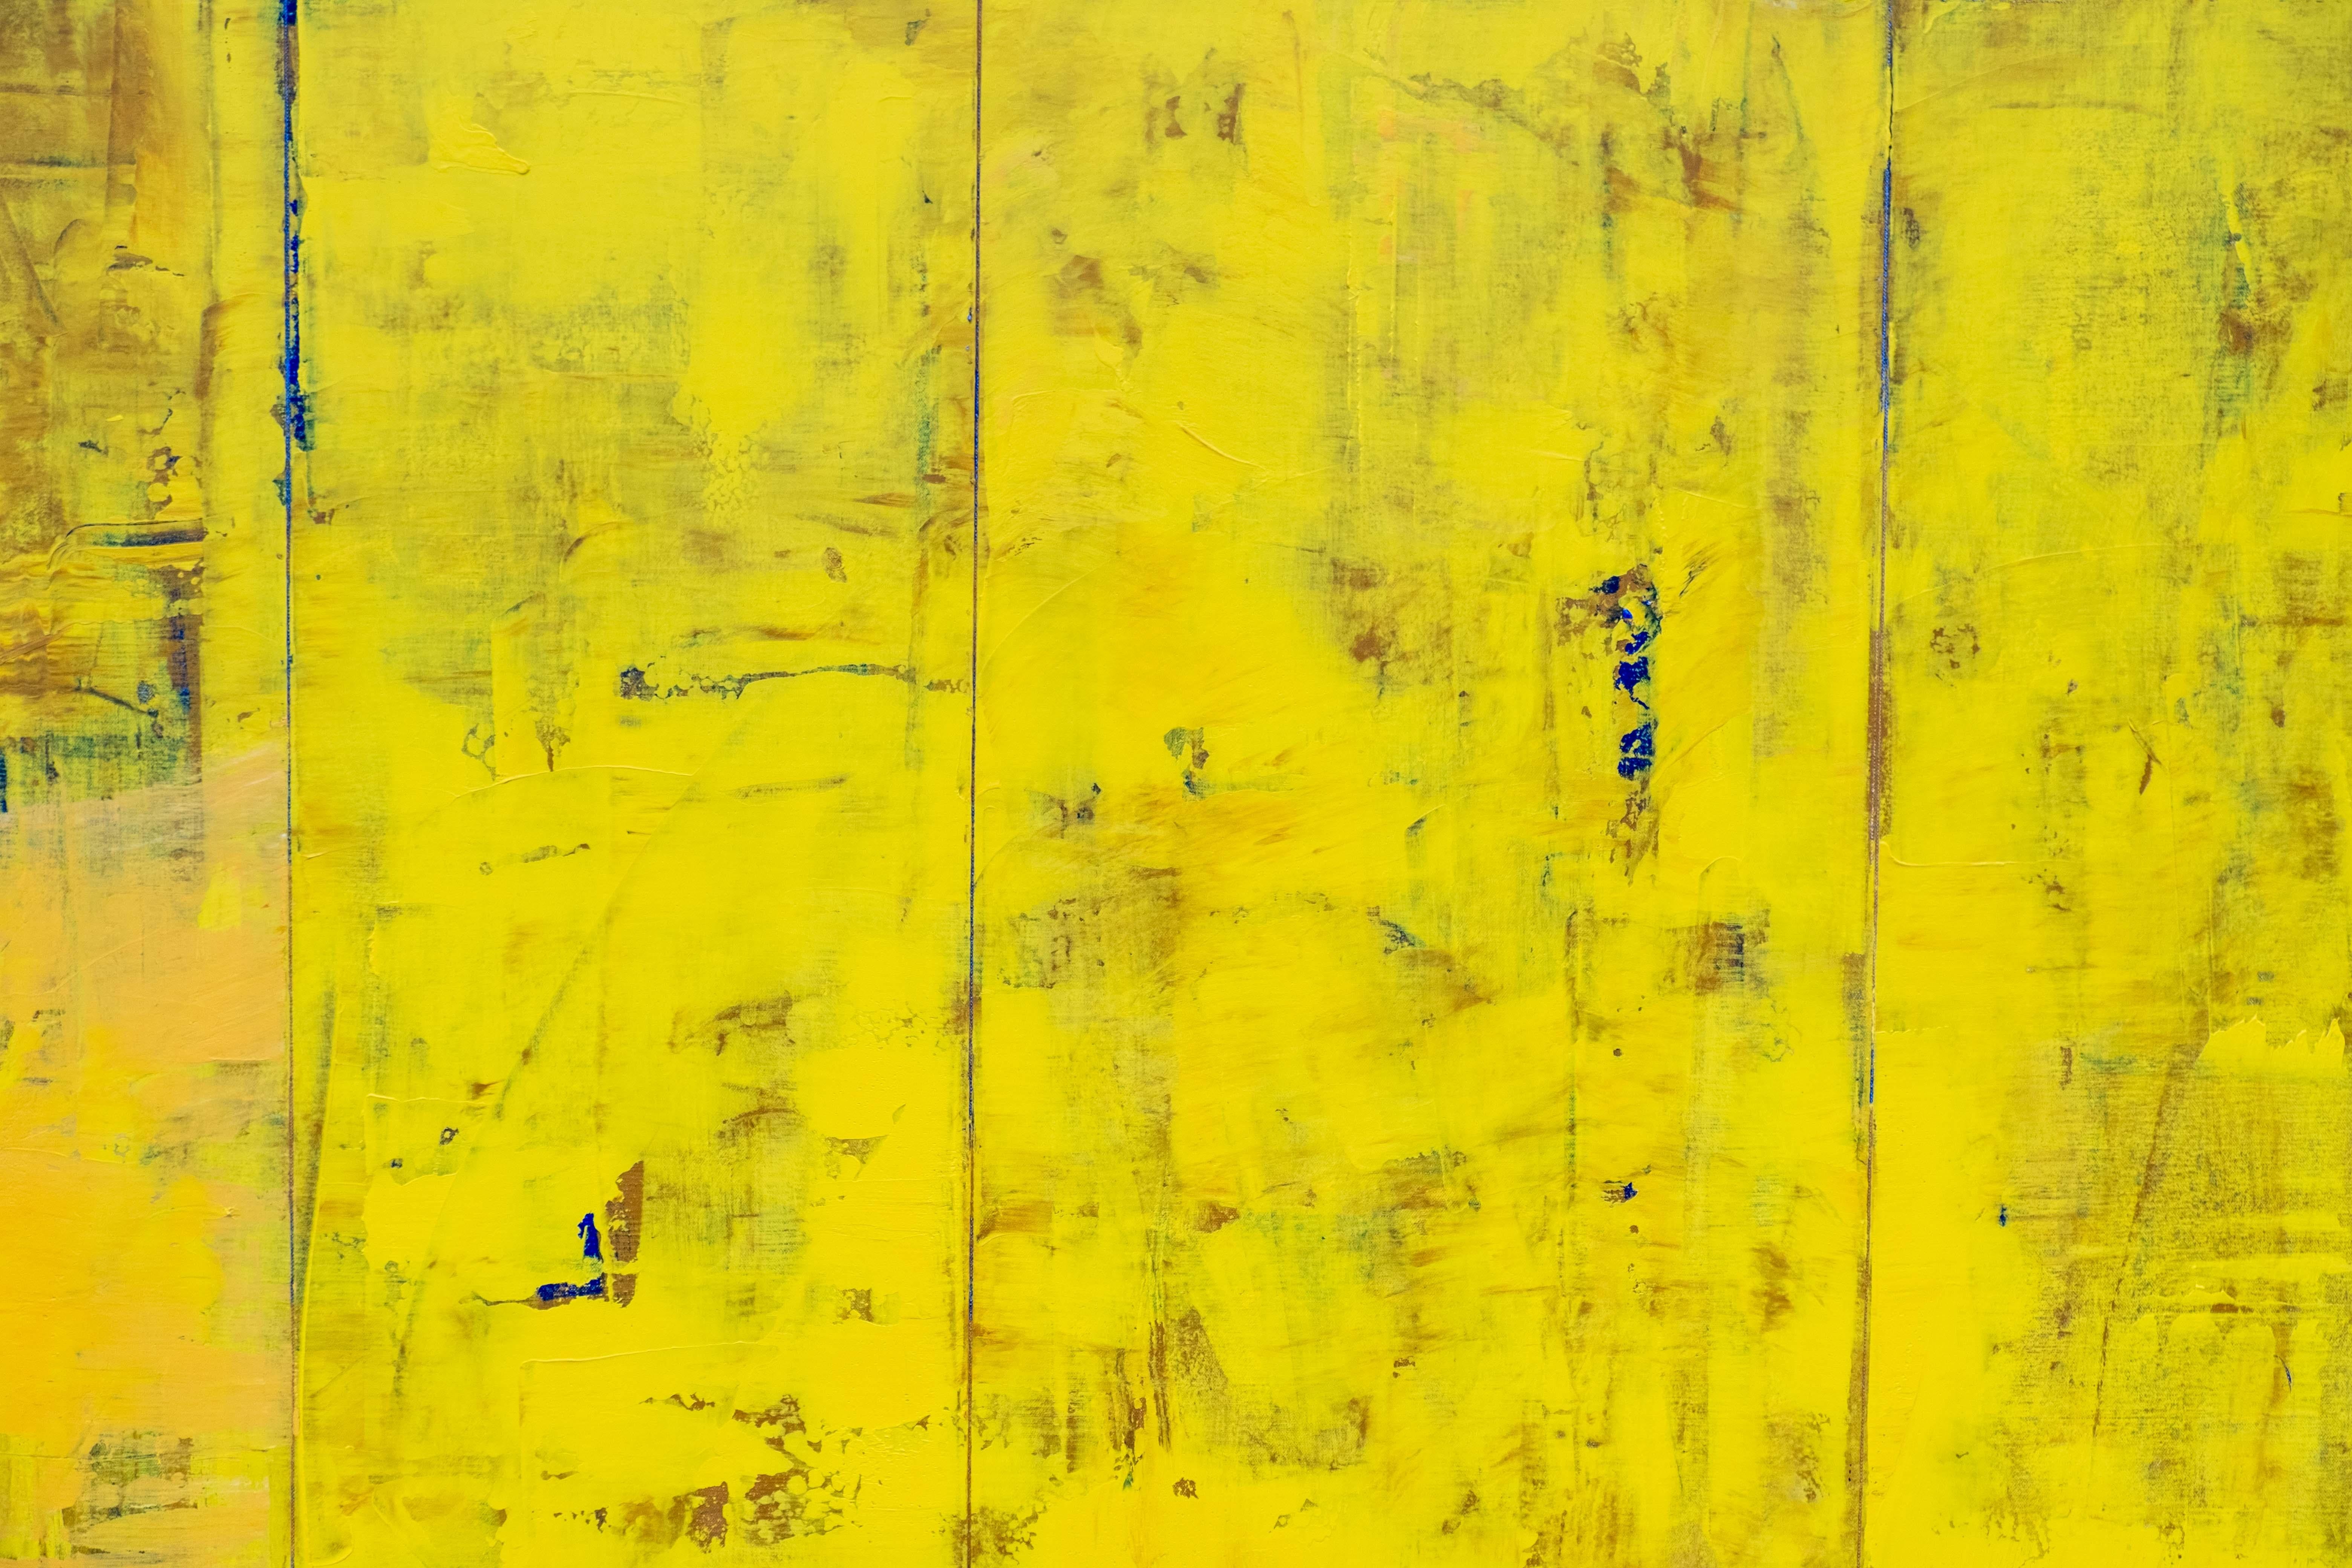 Amida - large, bright, colorful, yellow, abstract grid, modernist, oil on canvas 2